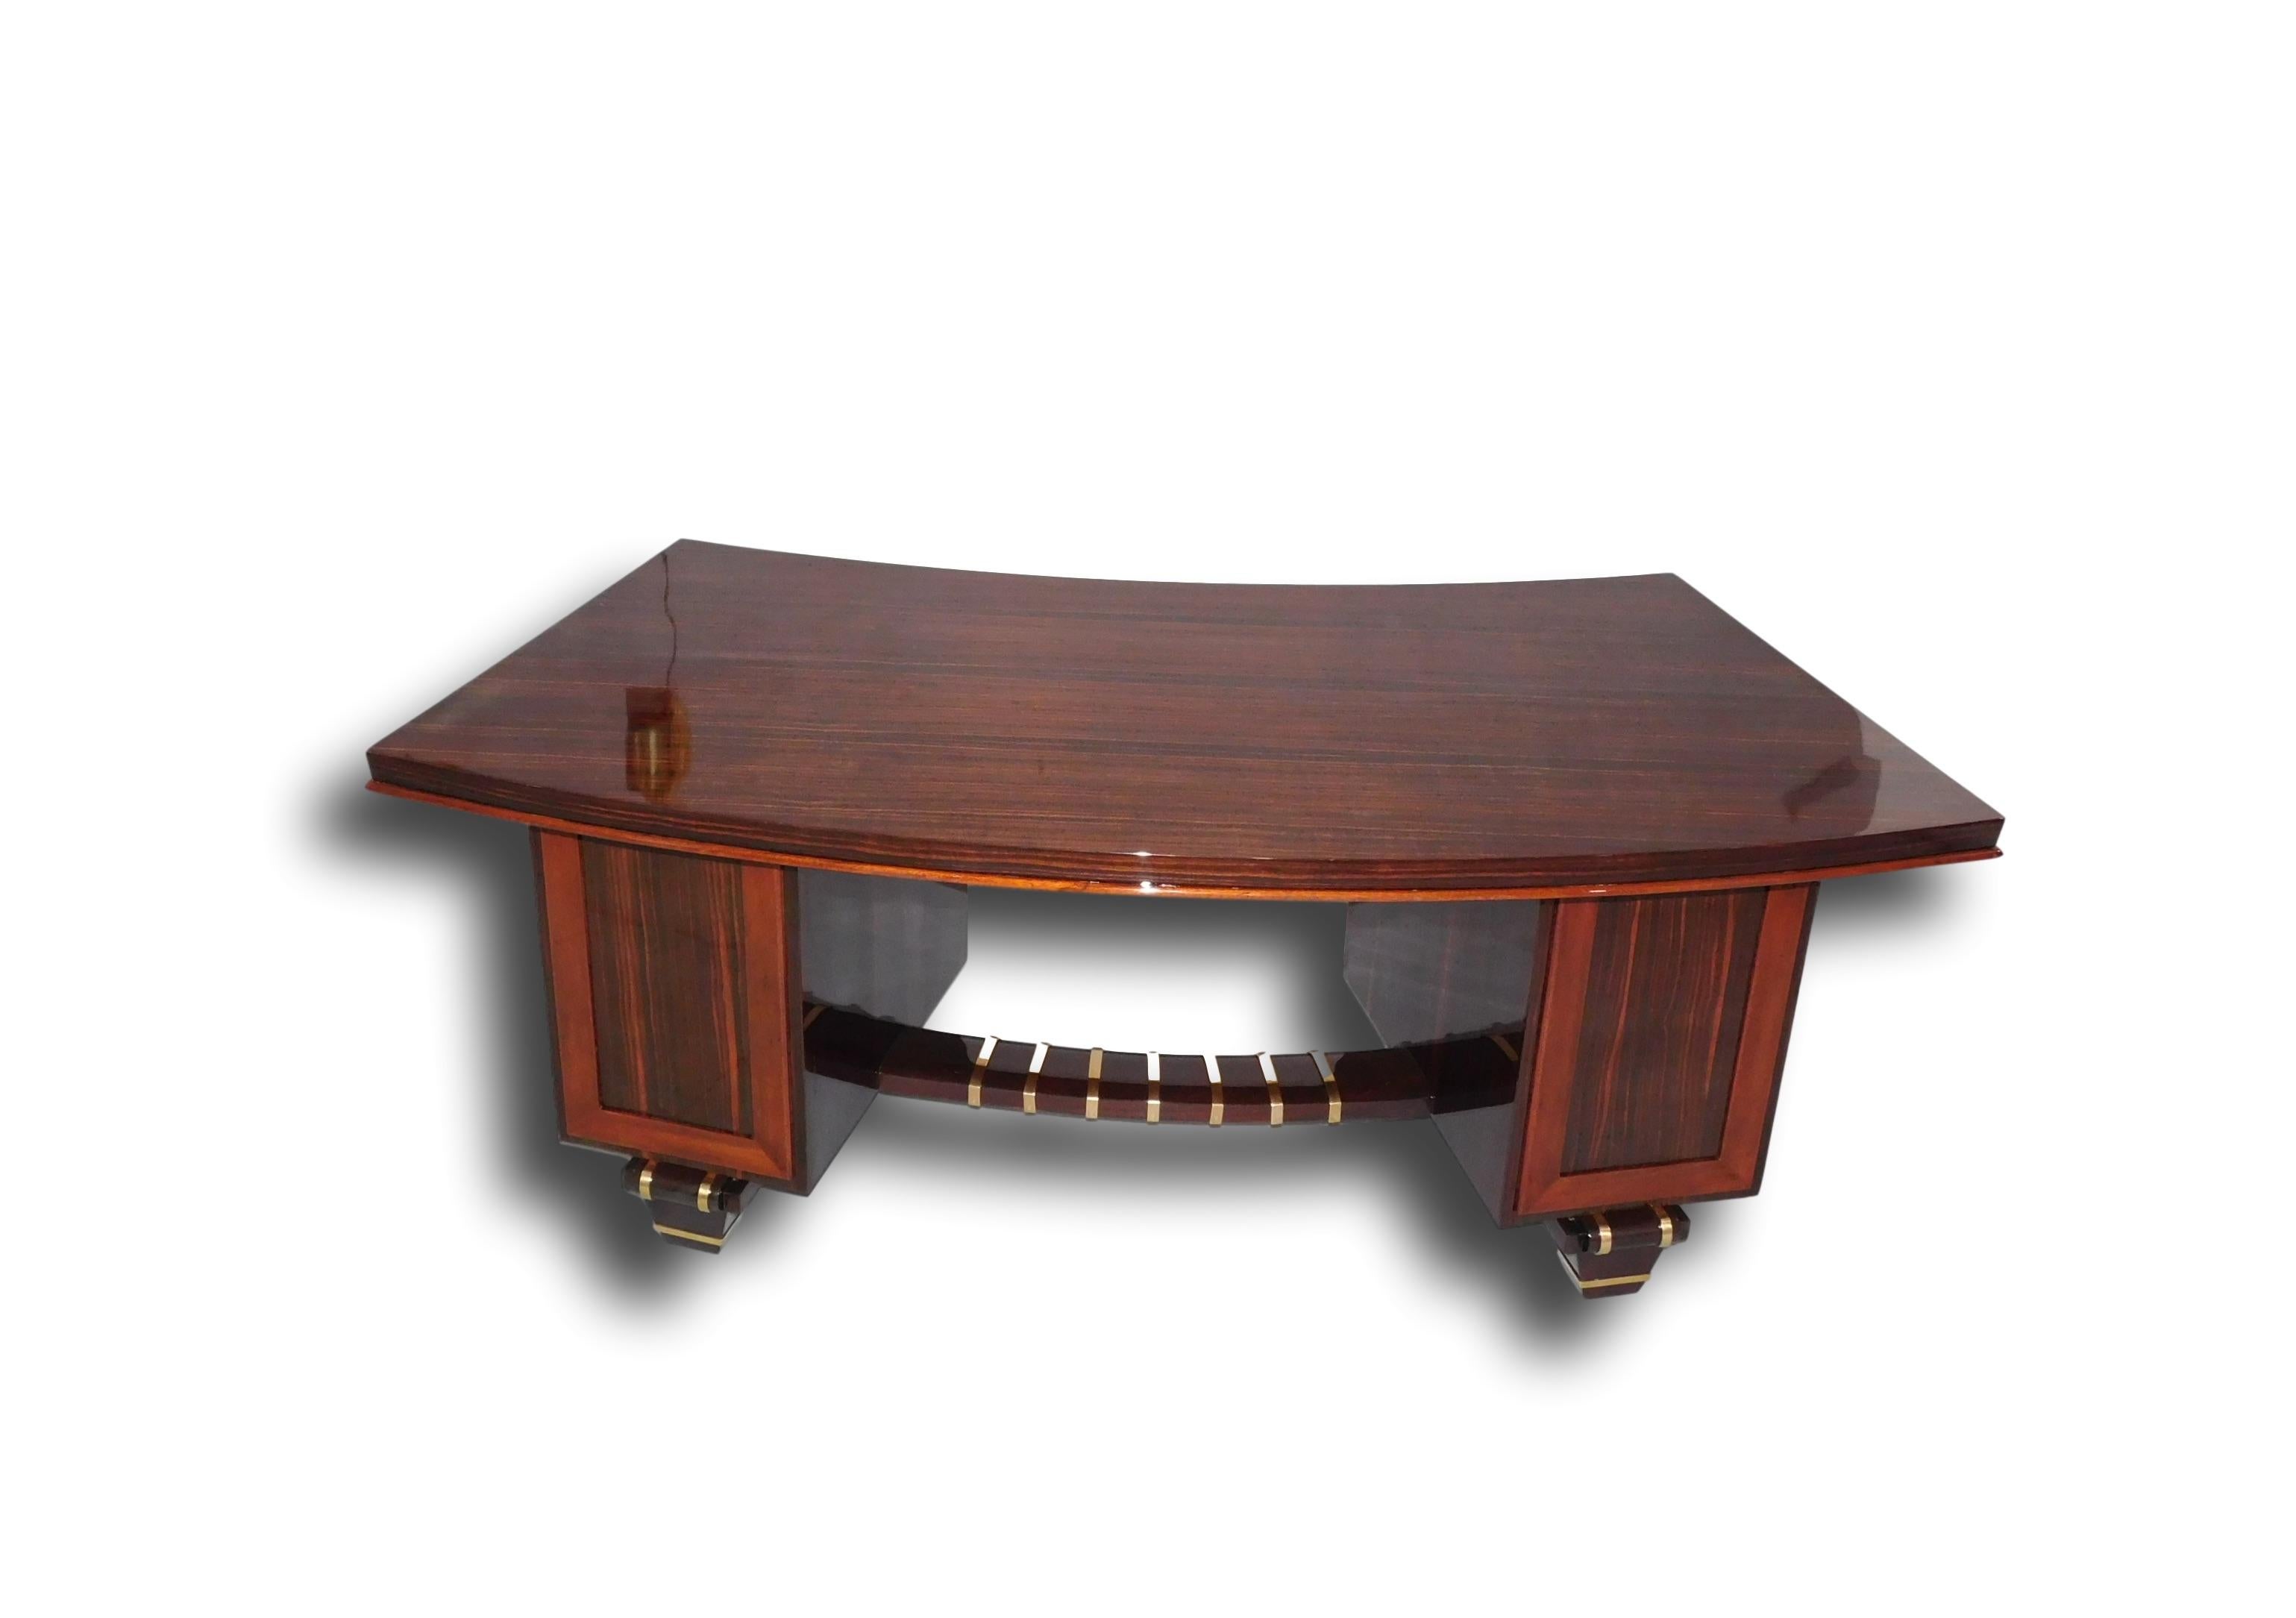 French Art Deco macassar ebony double pedestal desk in the manner of legendary Art Deco Parisian furniture and interior designer, Émile-Jacques Ruhlmann. This very important and rare desk will be a focal point in any office with its geometric shape